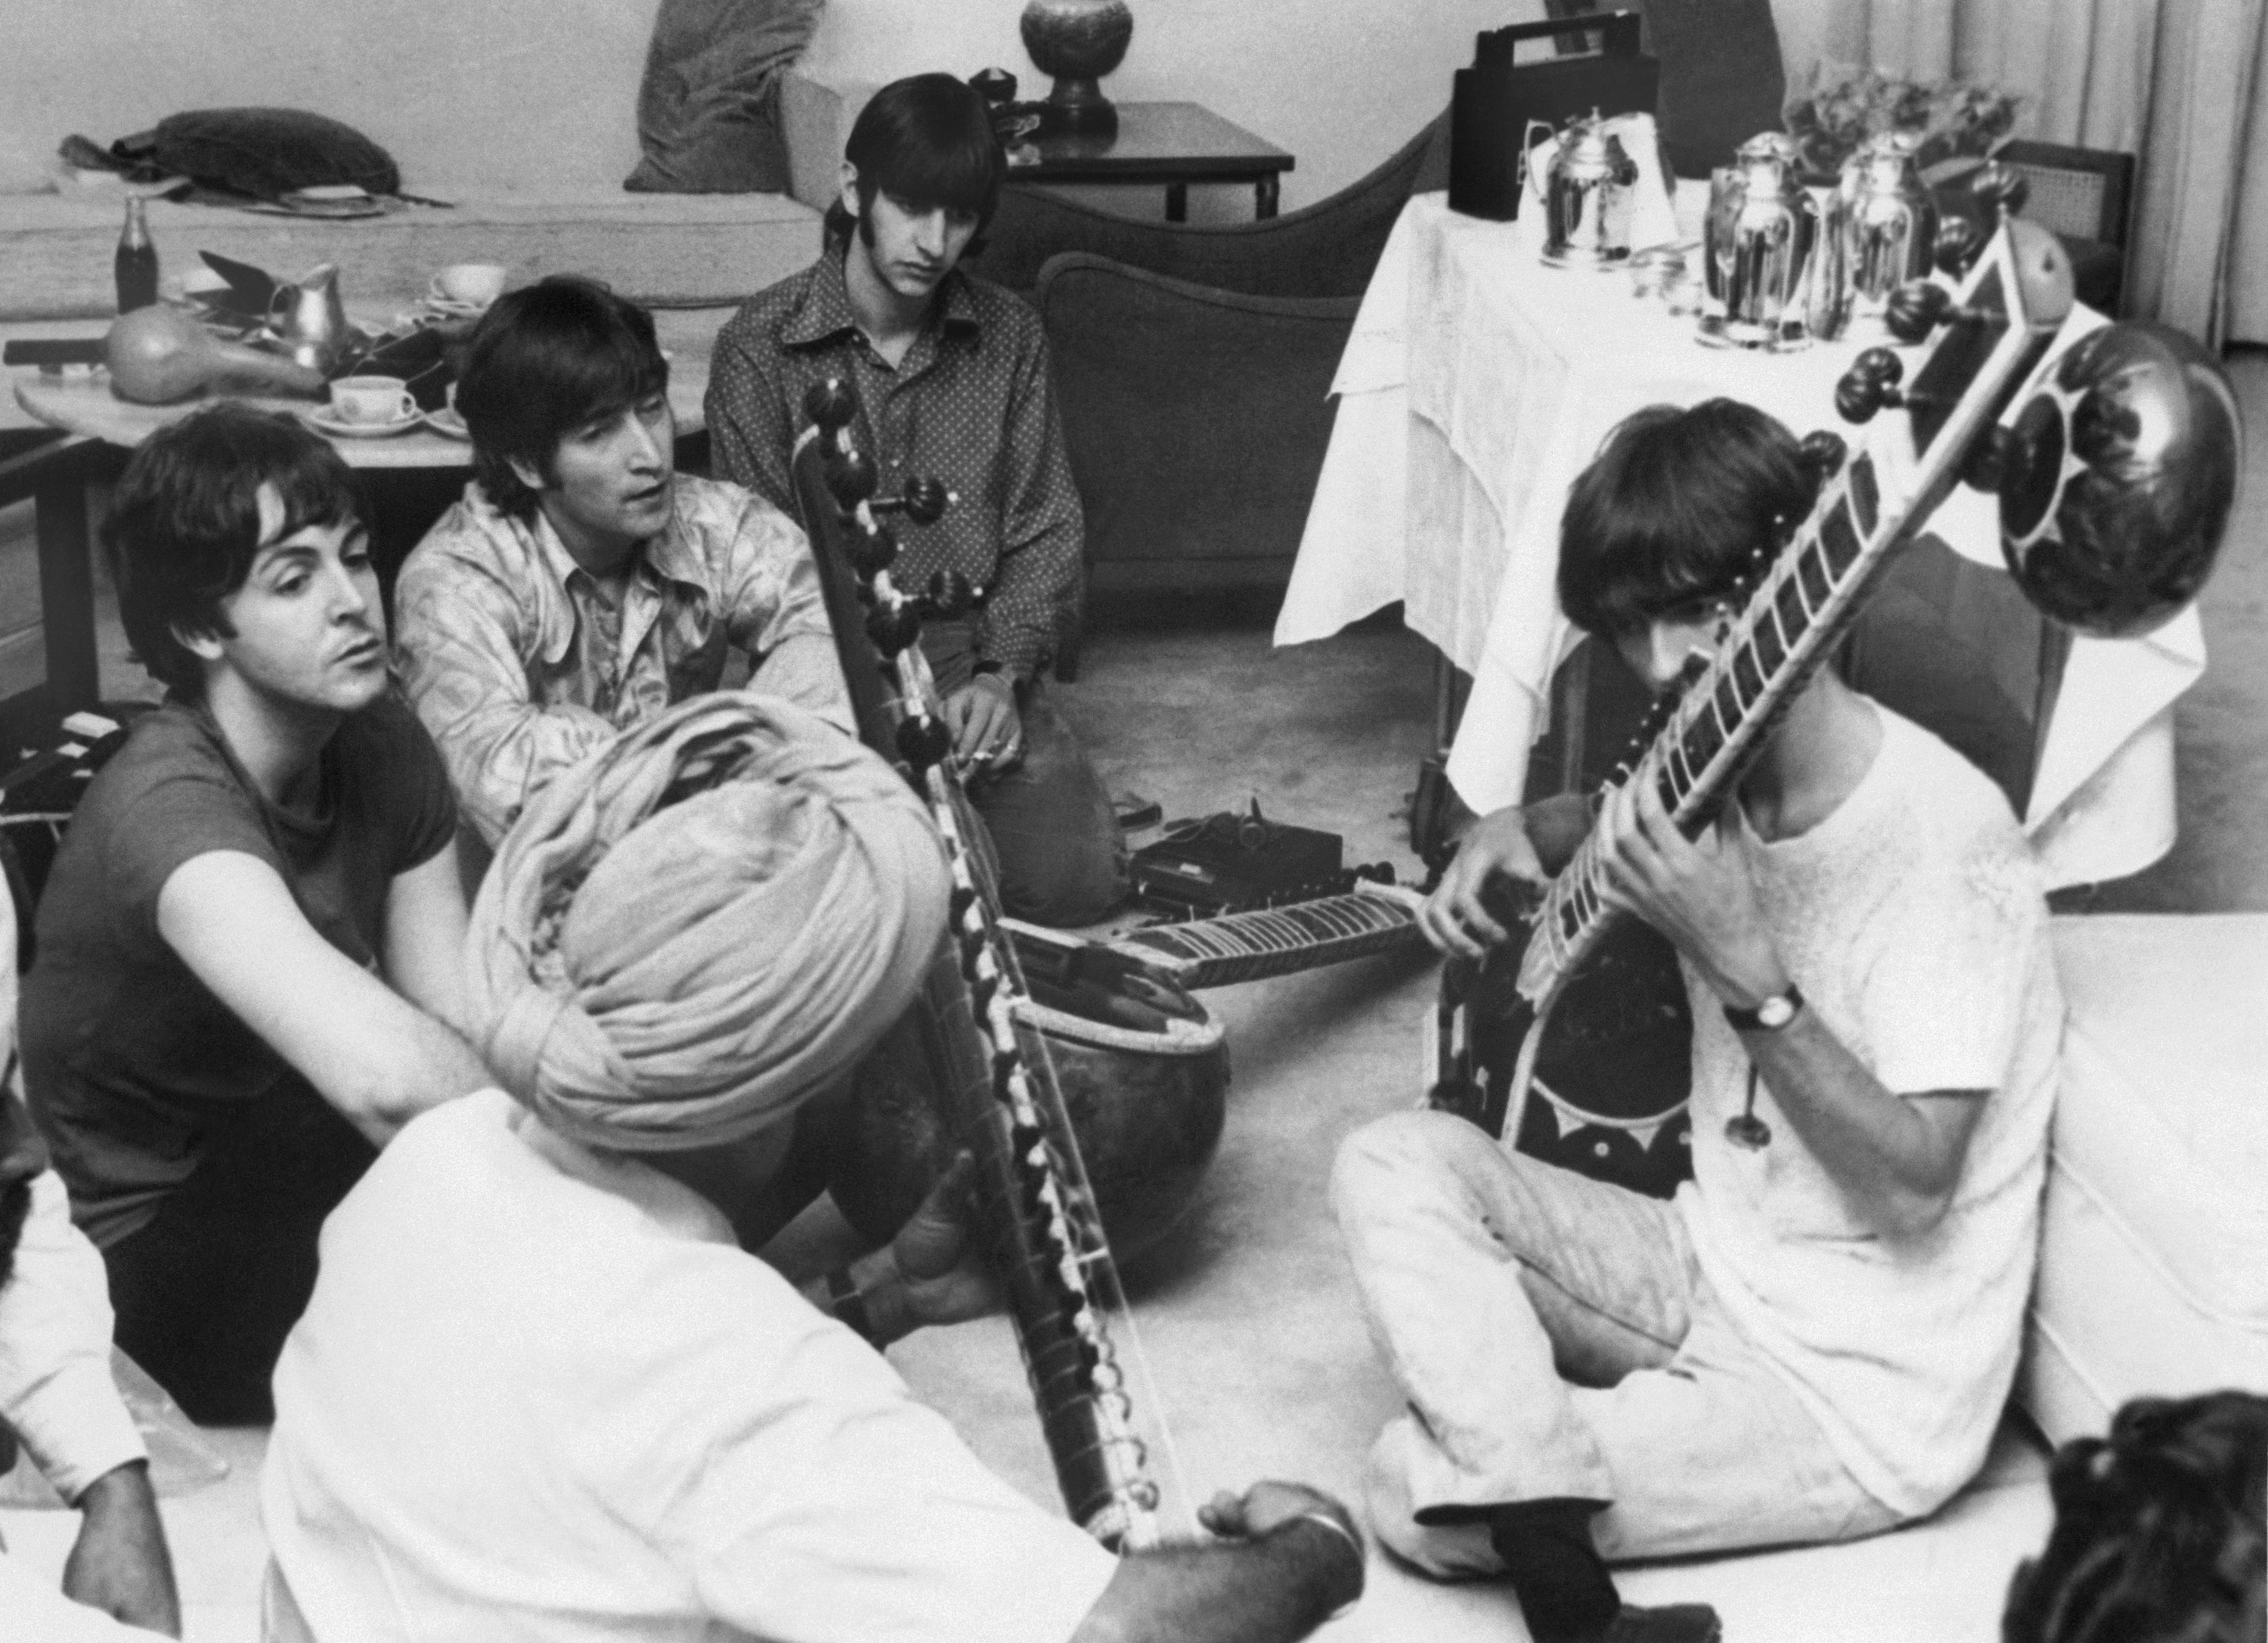 the band sits on the floor in India while learning a new instrument